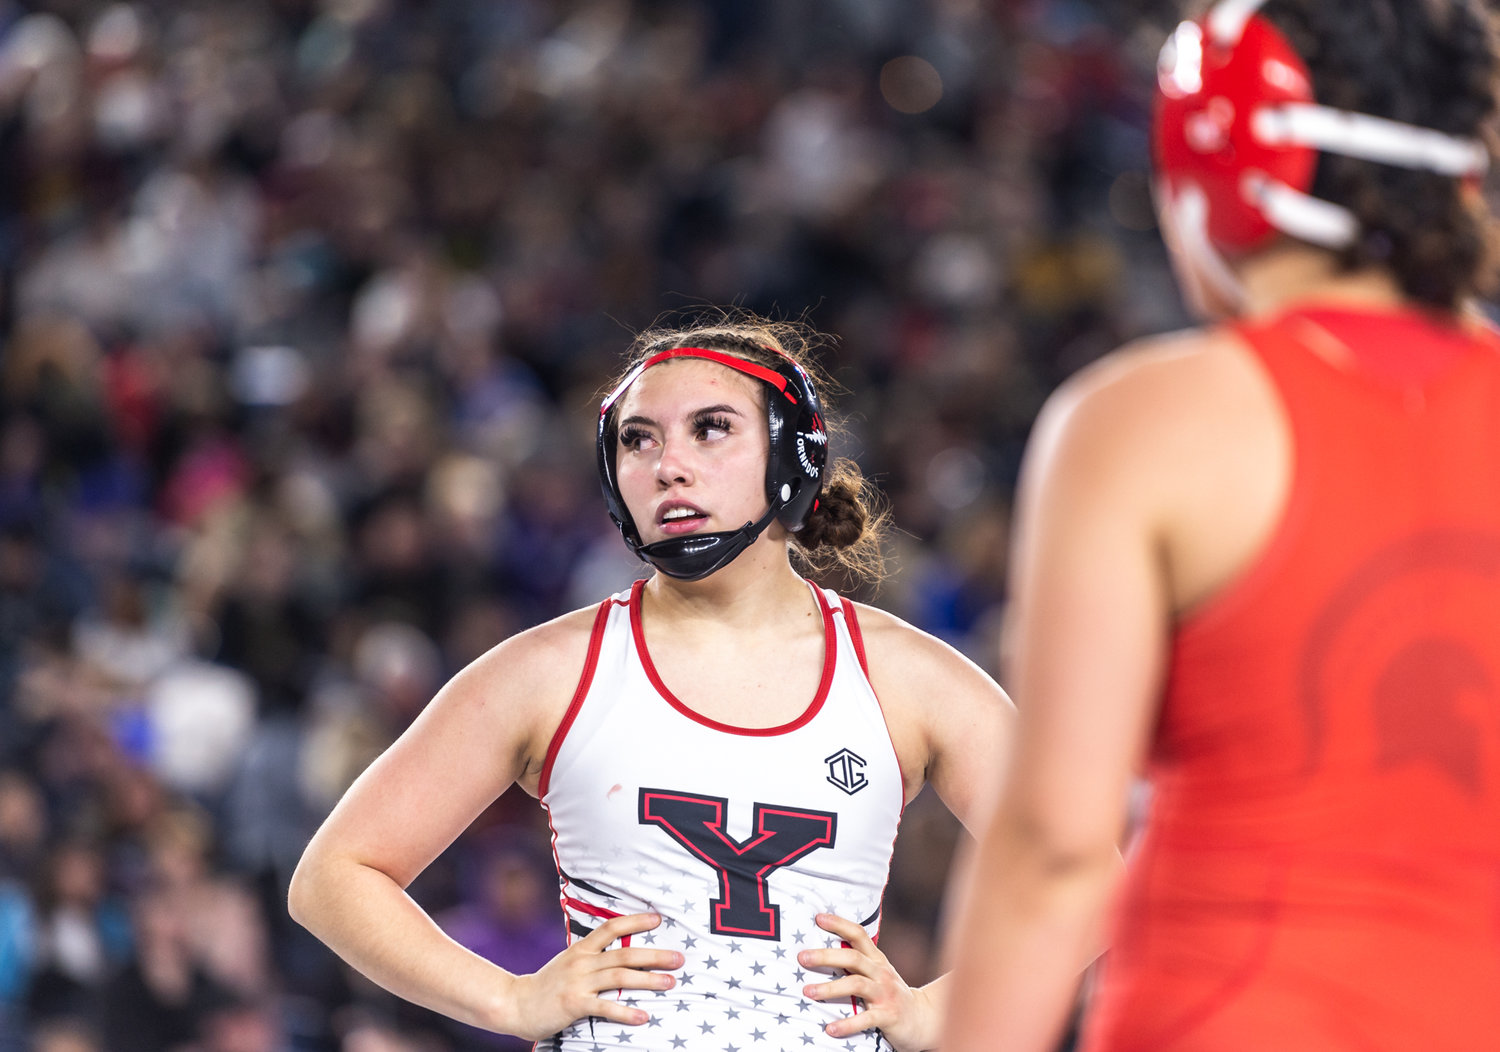 Yelm’s Amailee Niz, 145 pounds, competes against Stanwood’s Katana Karasti in the first round at Mat Classic XXXIV on Friday, February 17, 2023, at the Tacoma Dome. (Joshua Hart/For The Chronicle)